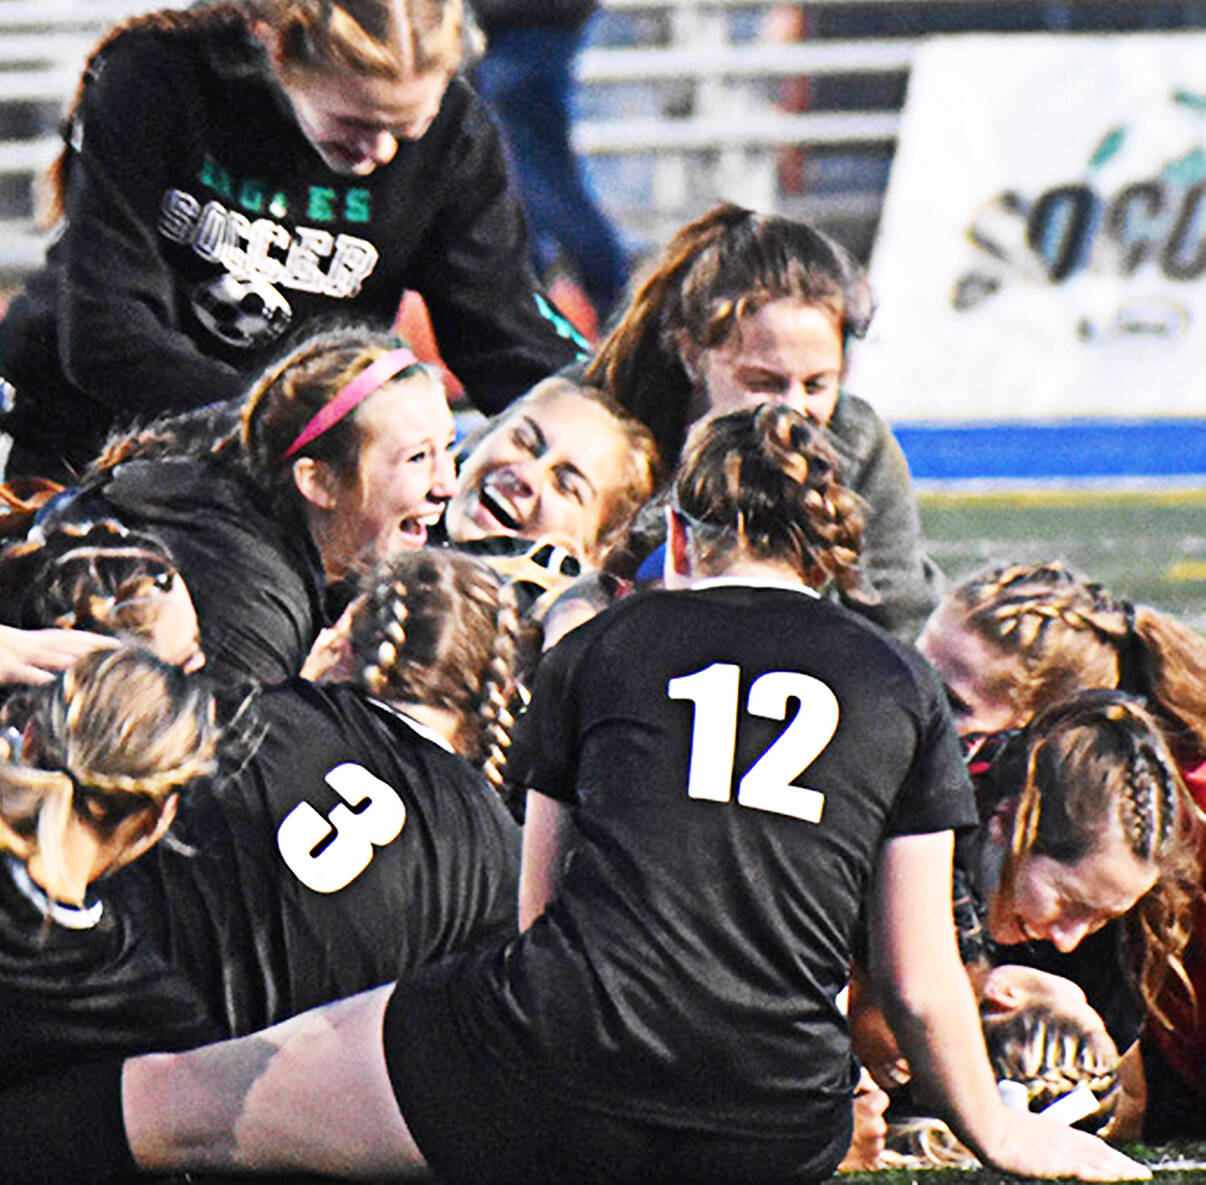 file photos
The Klahowya girls soccer team celebrates after winning the state title this year.